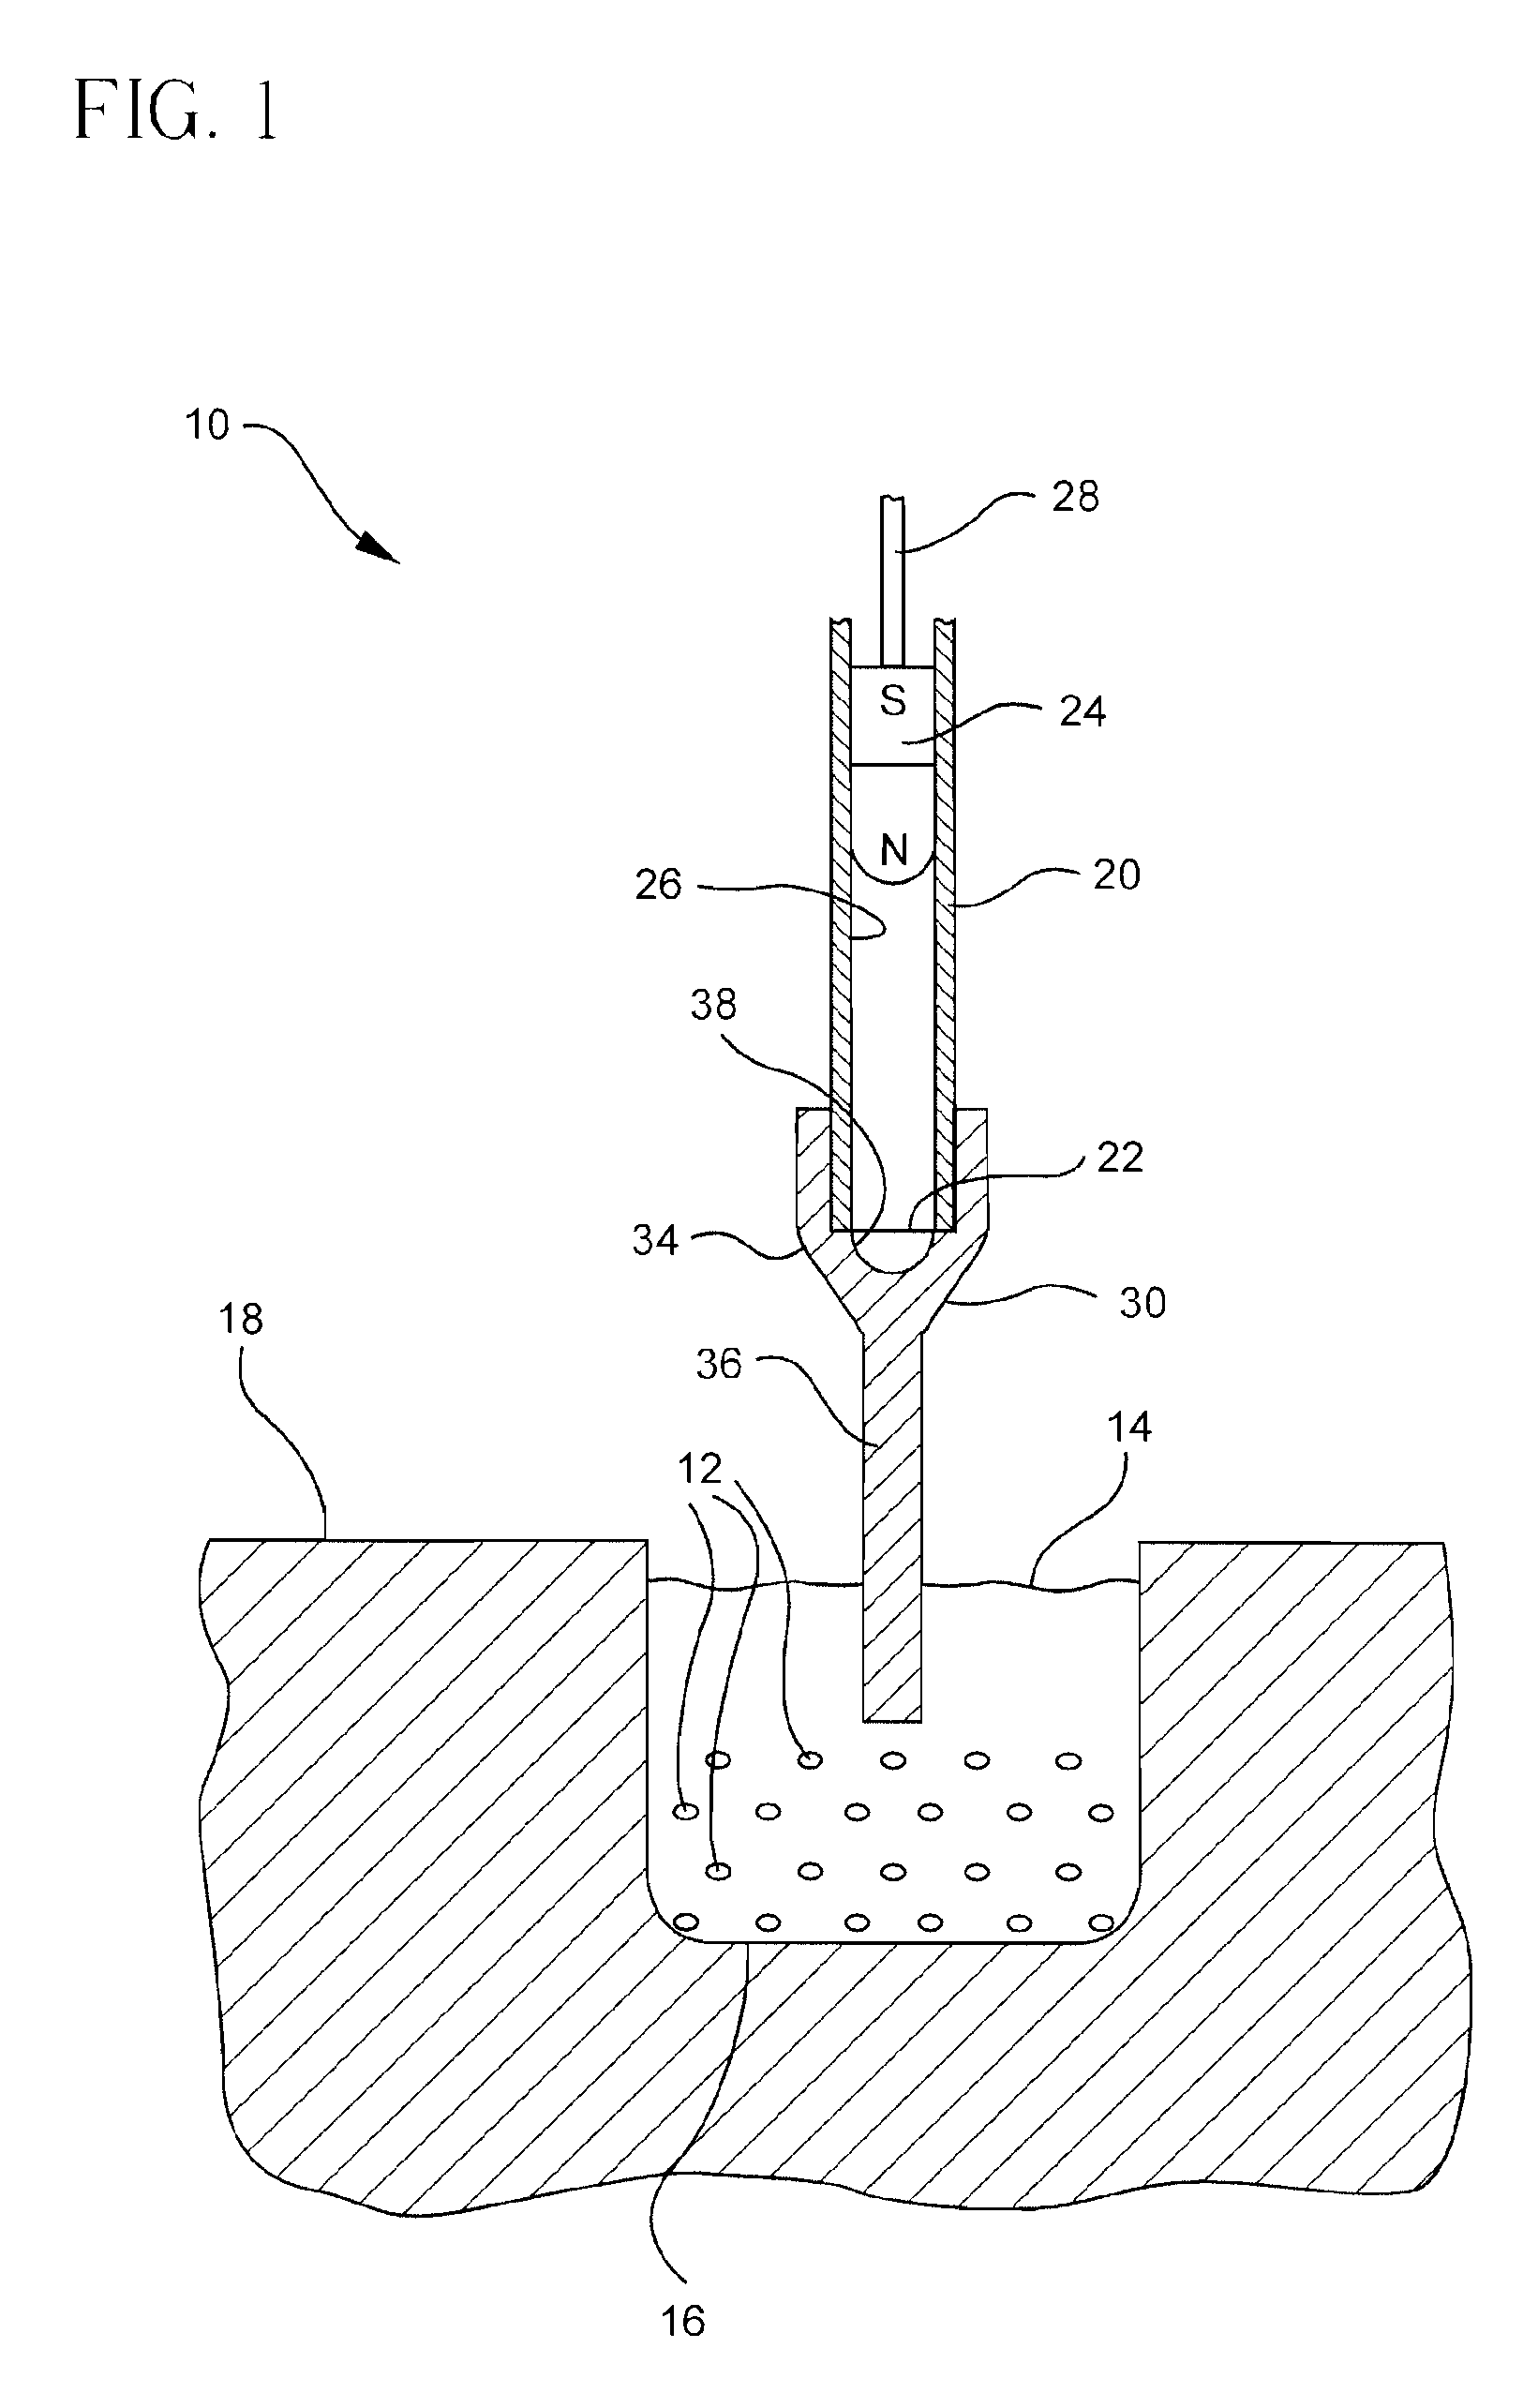 Flux concentrator for biomagnetic particle transfer device